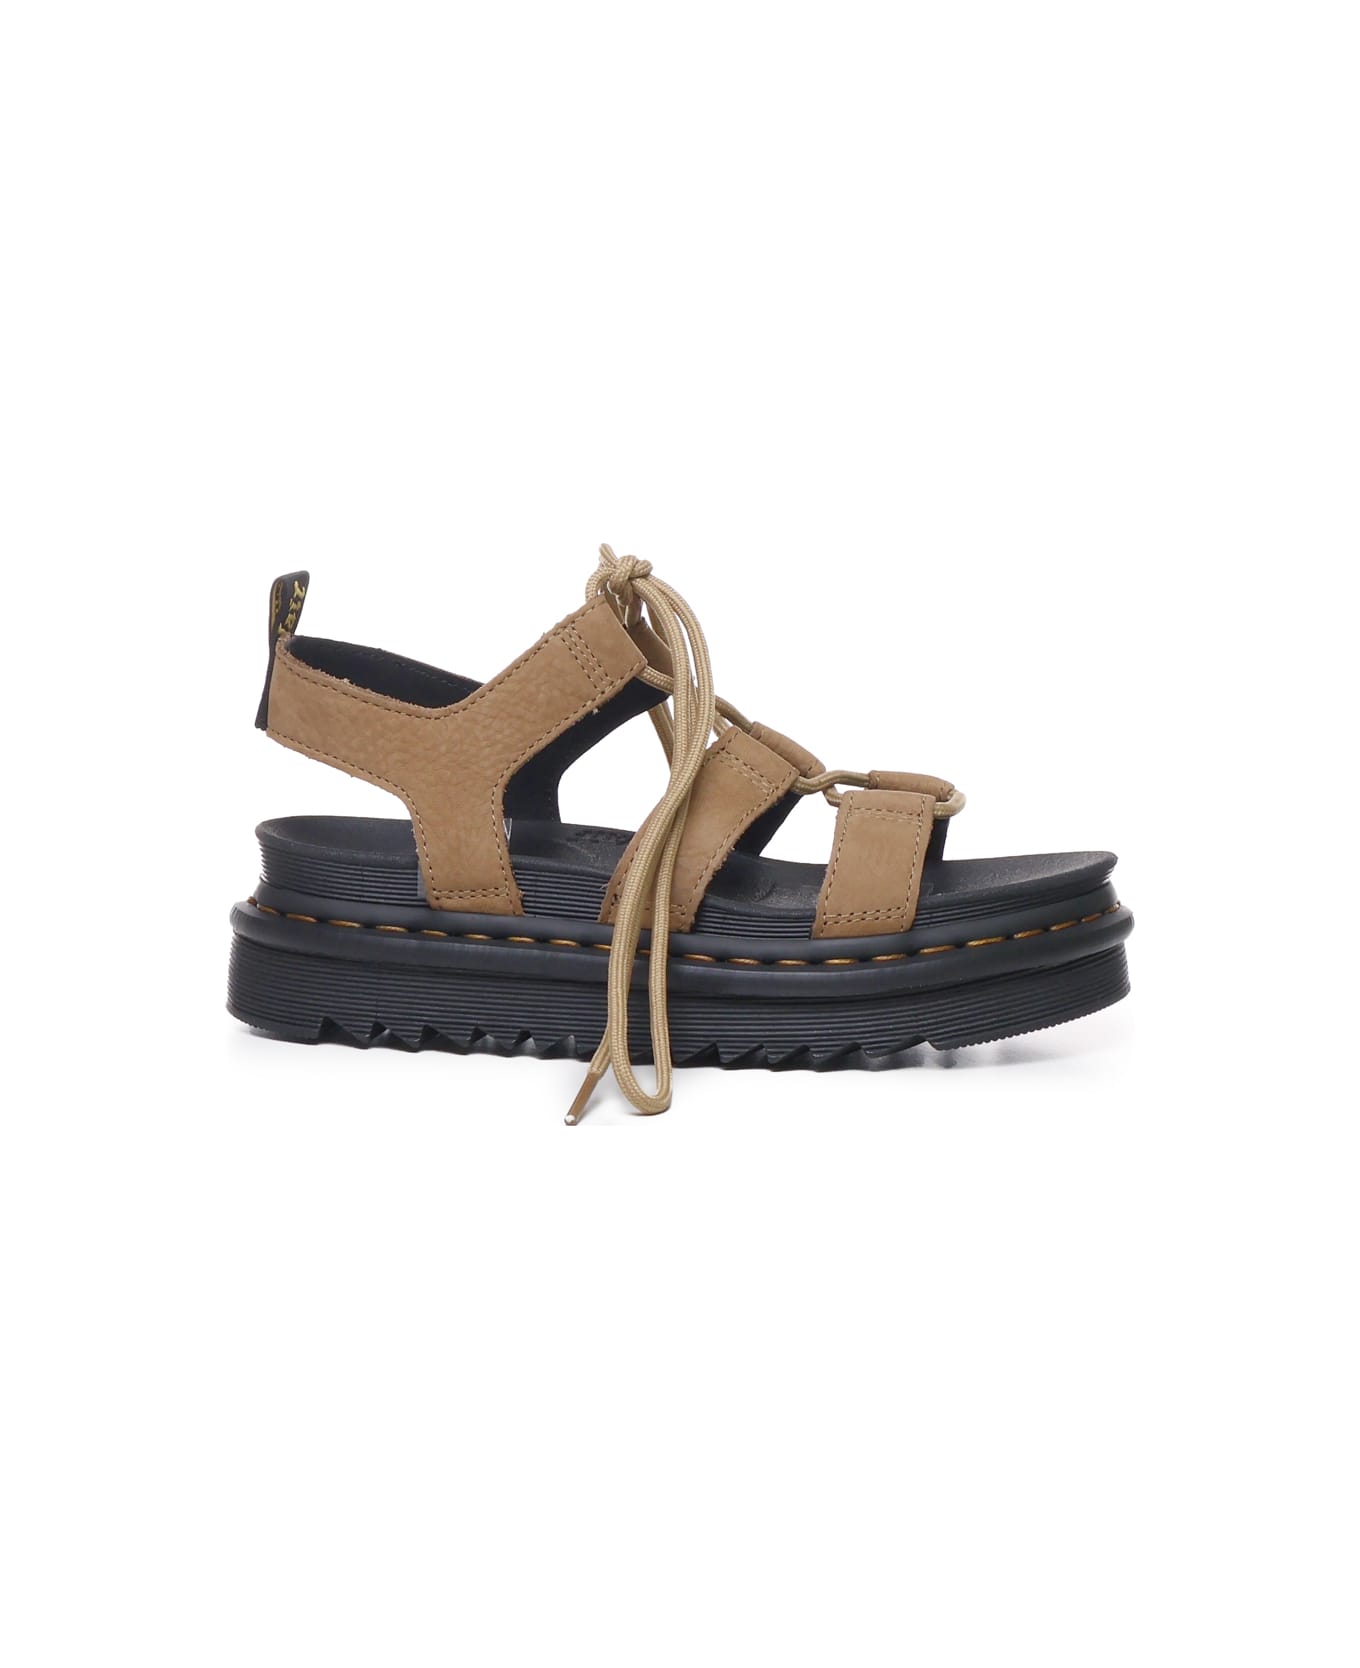 Dr. Martens Nartilla Sandals In Tumbled Leather - Tan サンダル